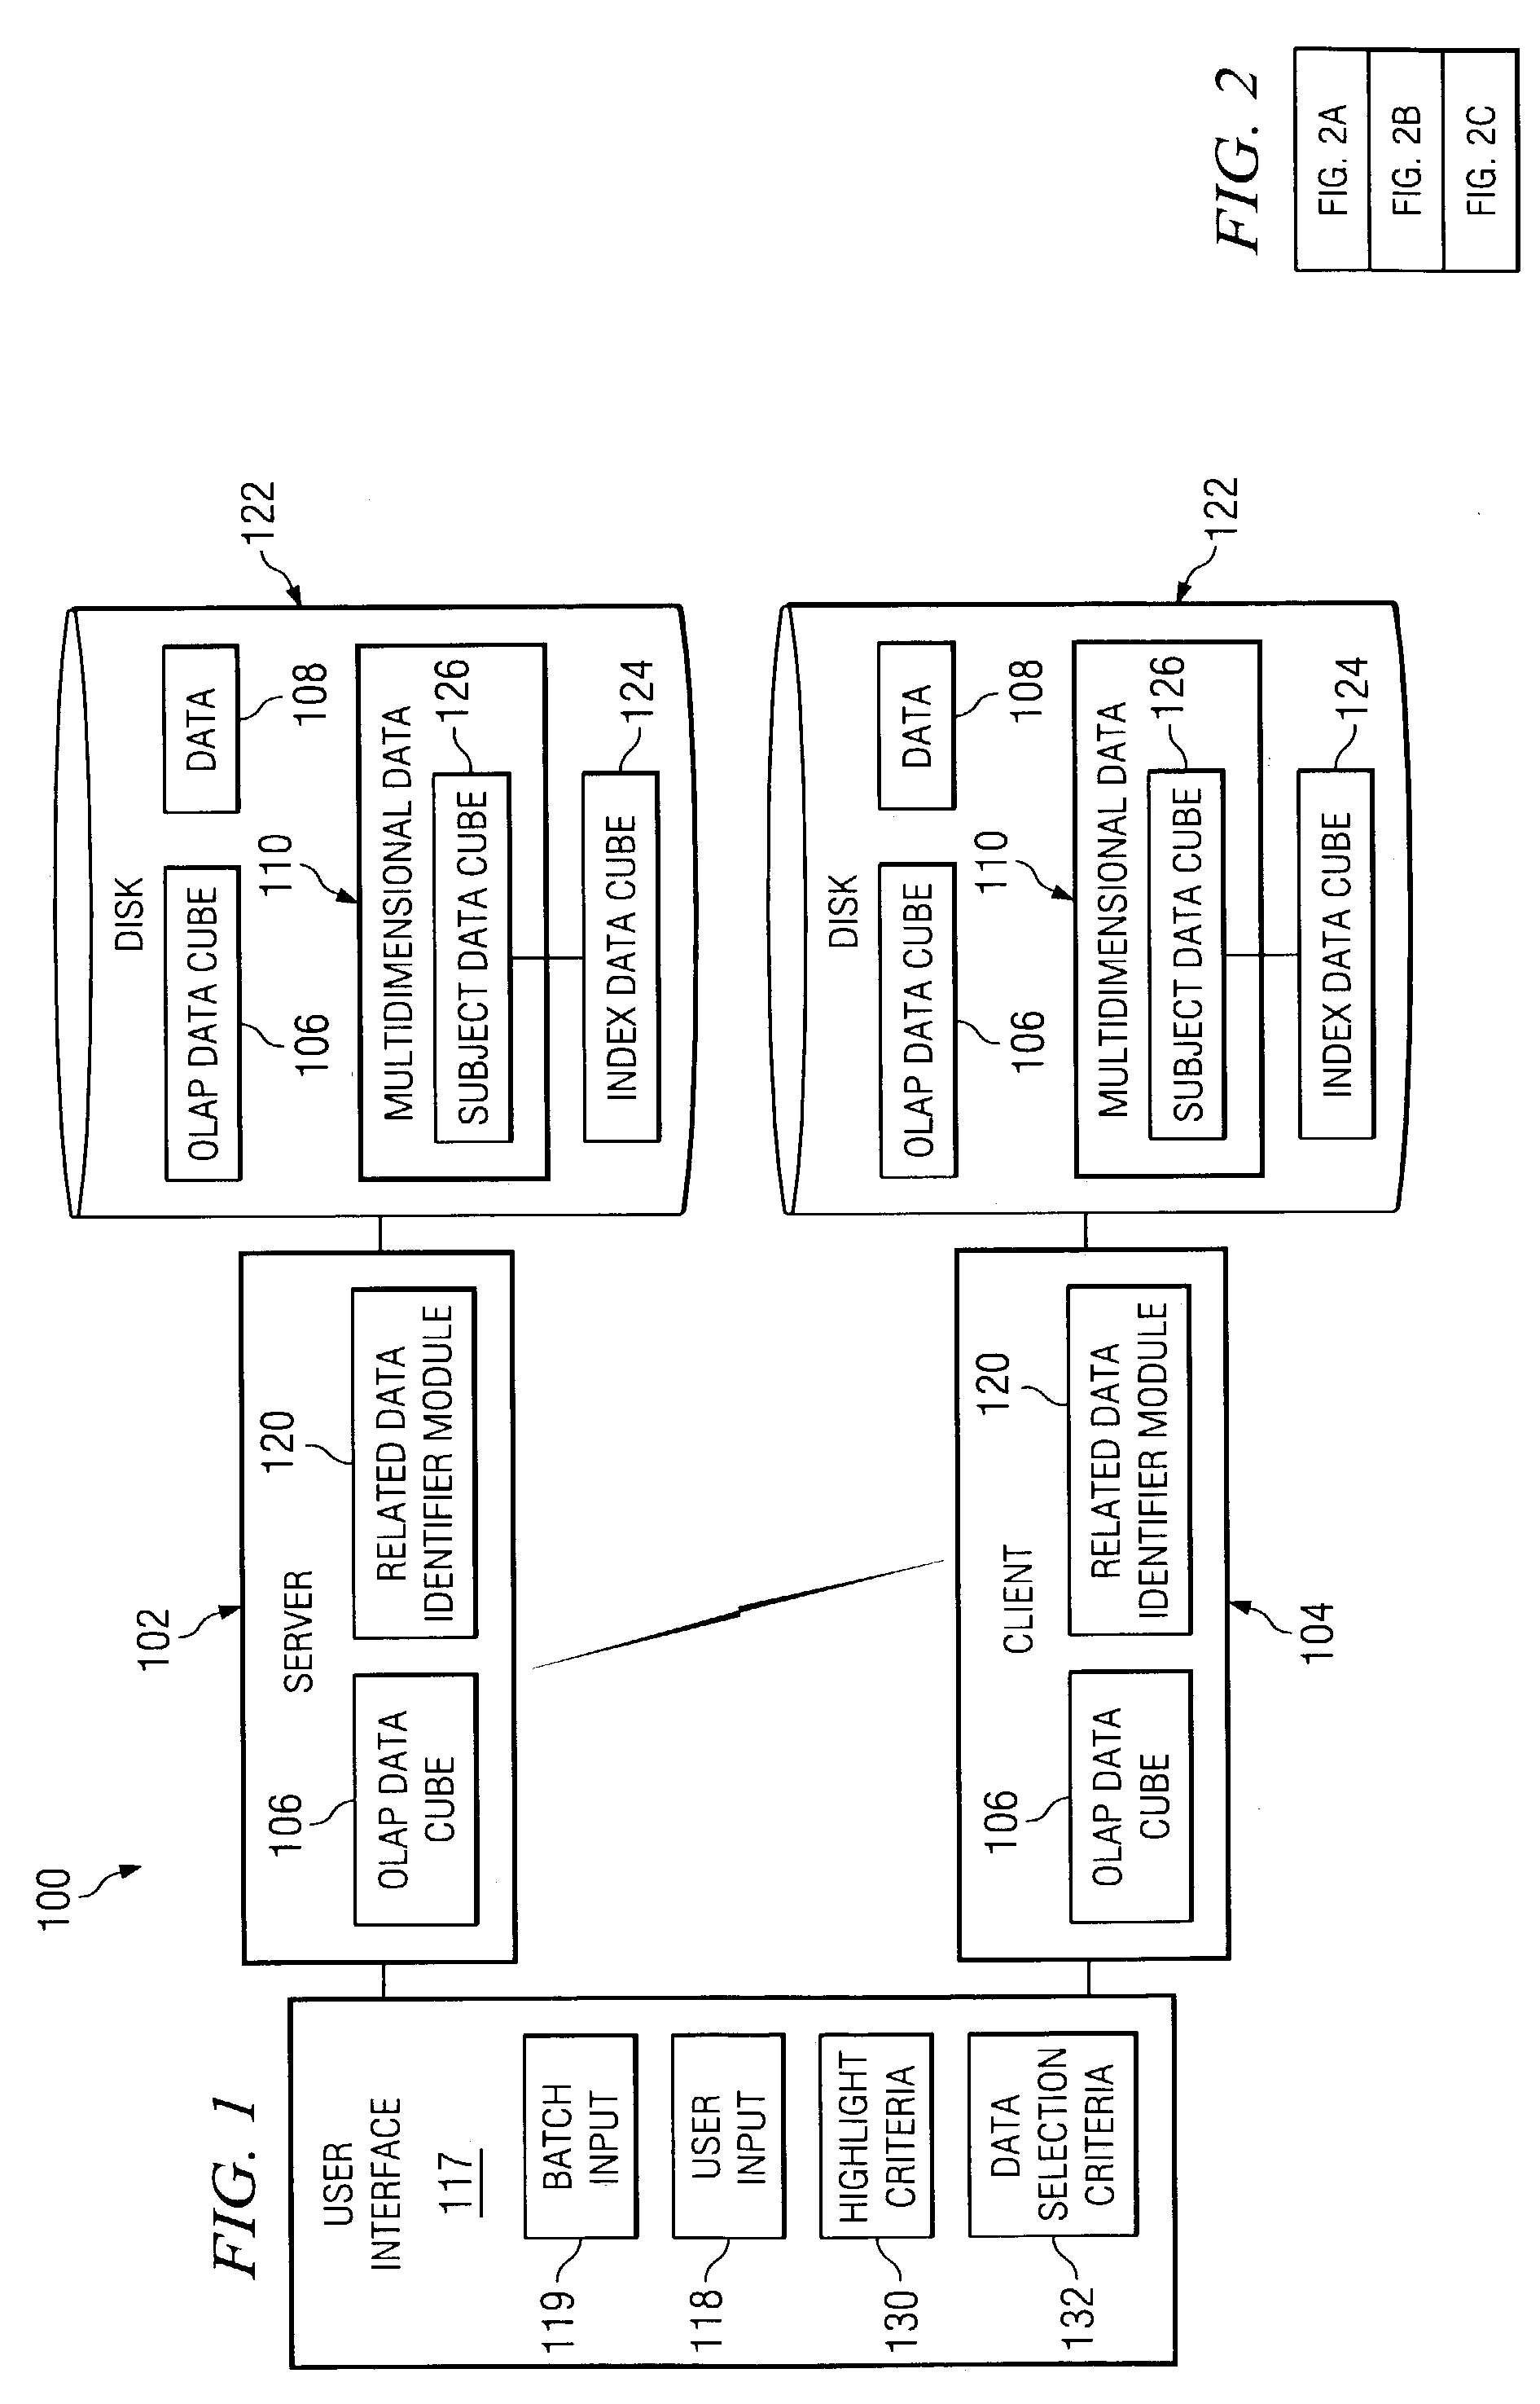 Methods to identify related data in a multidimensional database